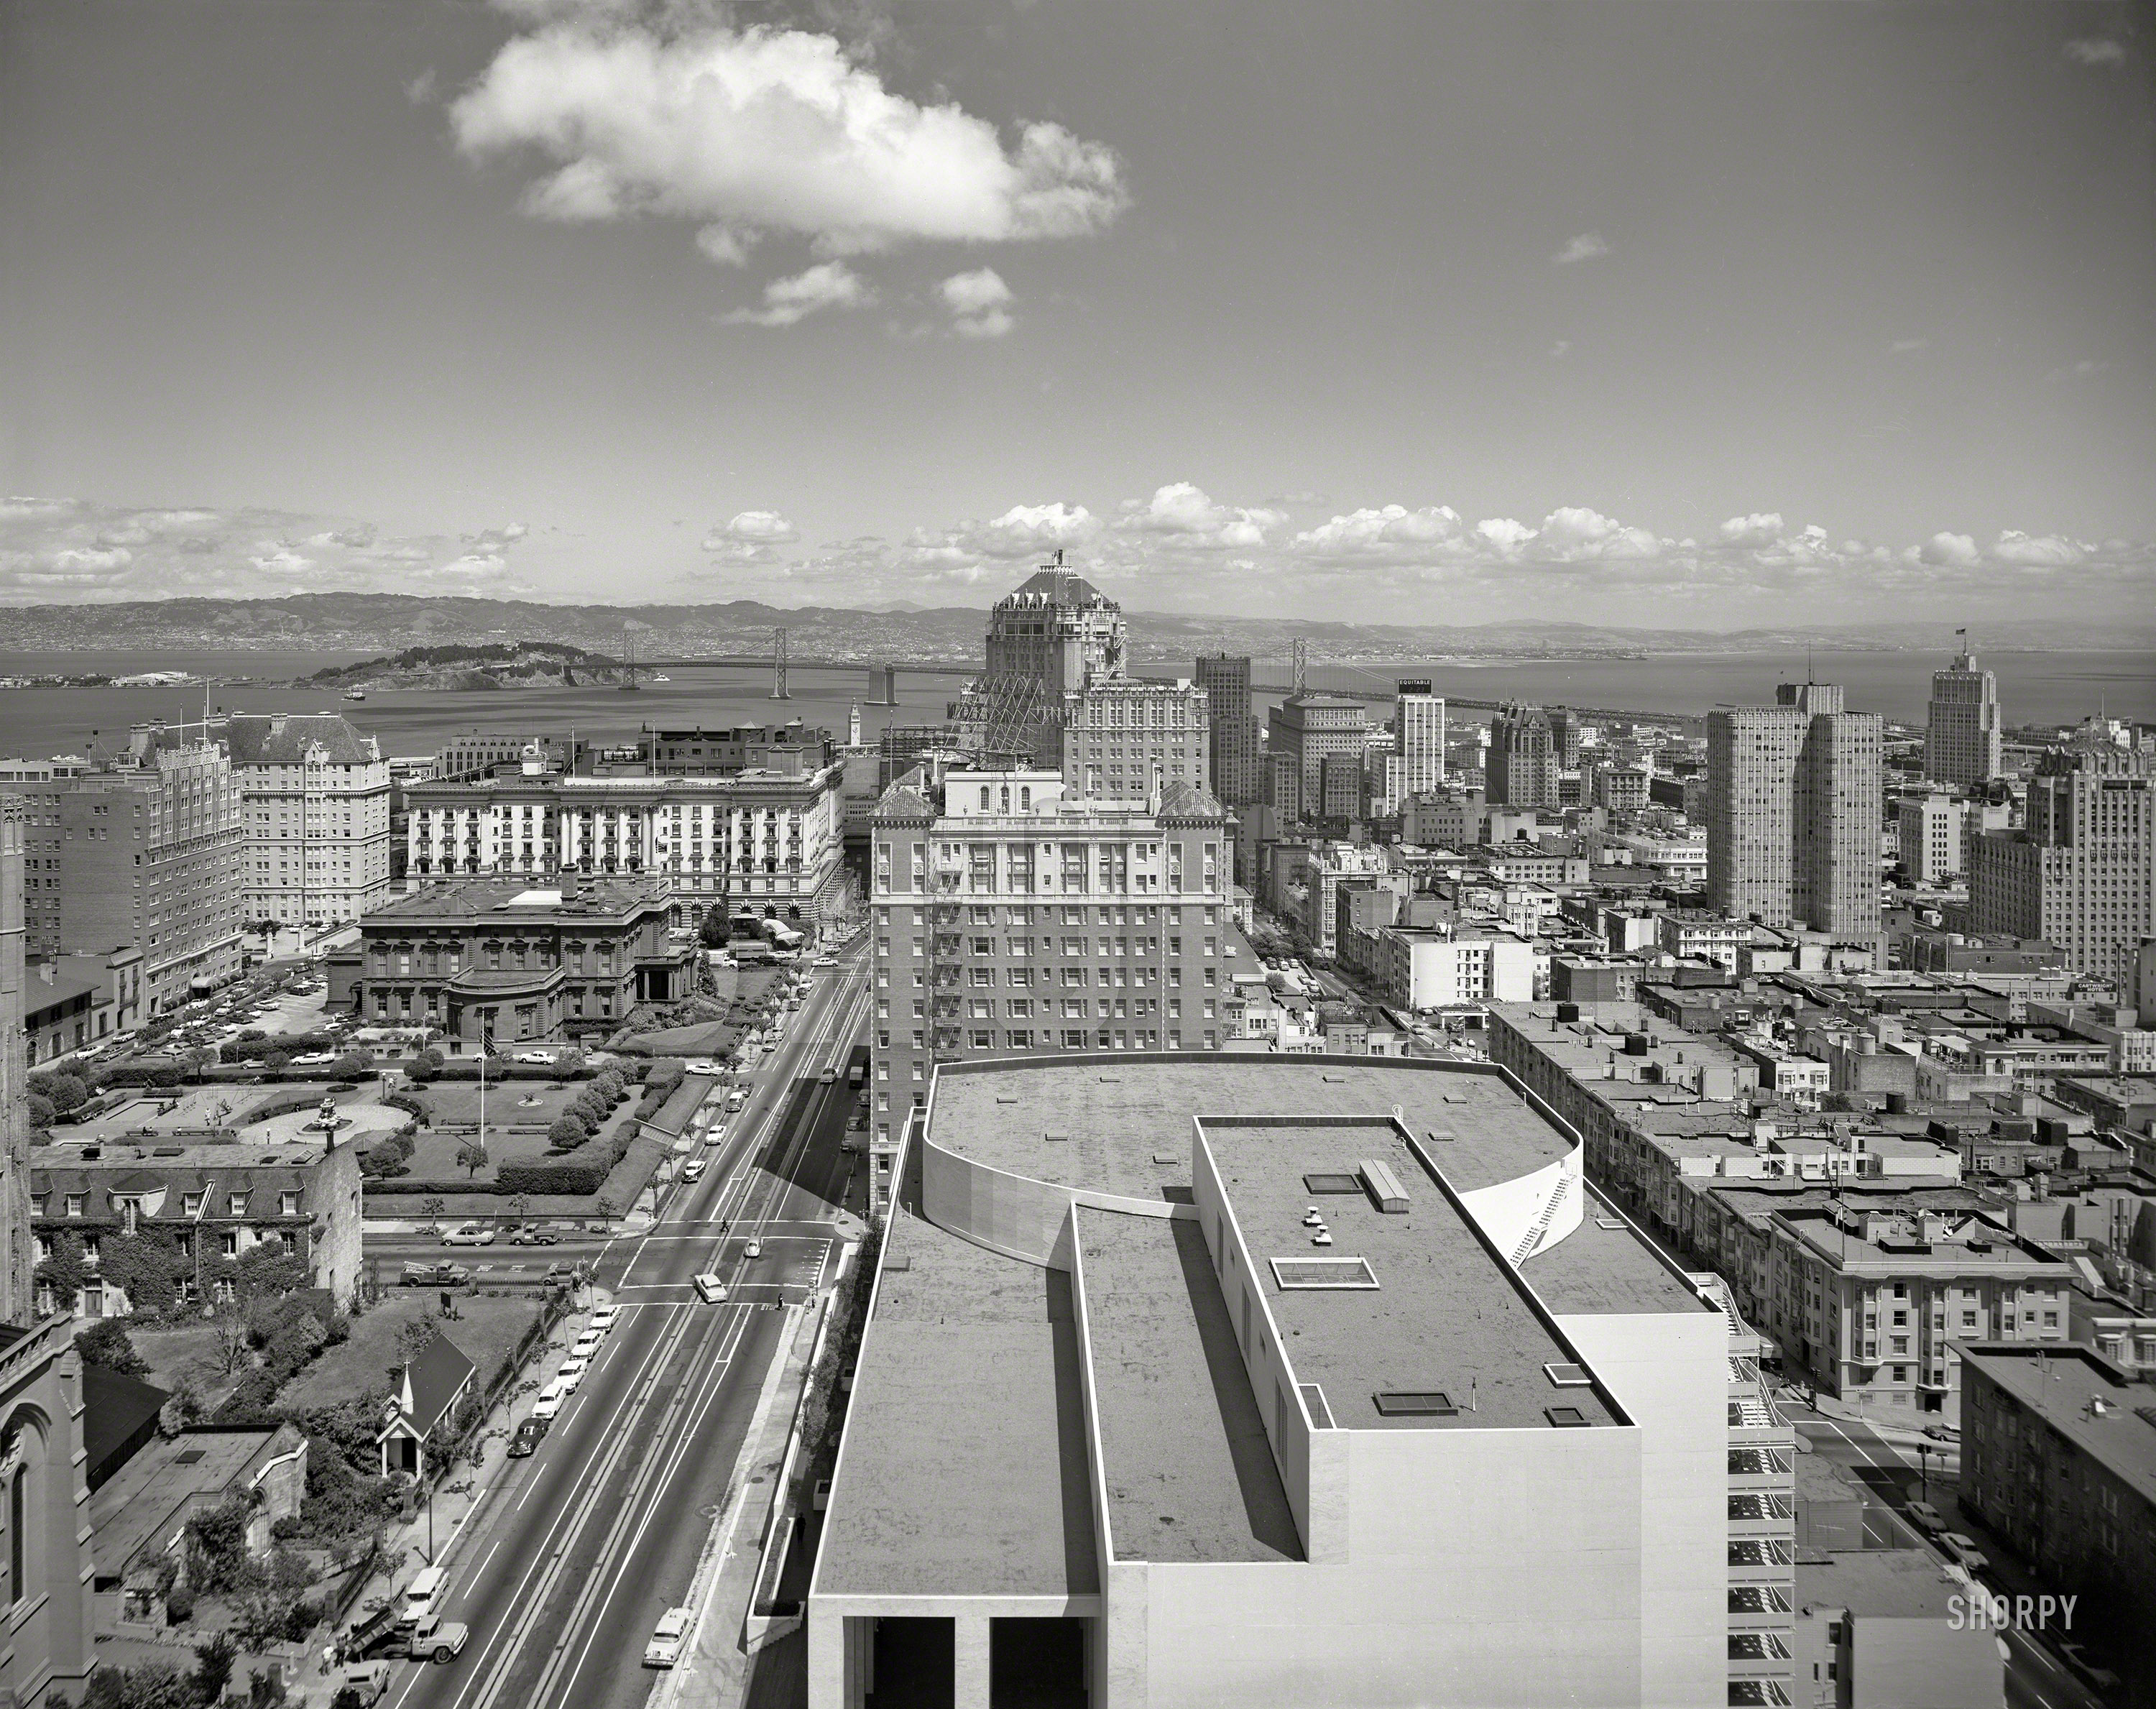 May 1, 1959. "Downtown San Francisco -- California Street East Bay vista from Nob Hill." 8x10 inch acetate negative, photographer unknown. View full size.